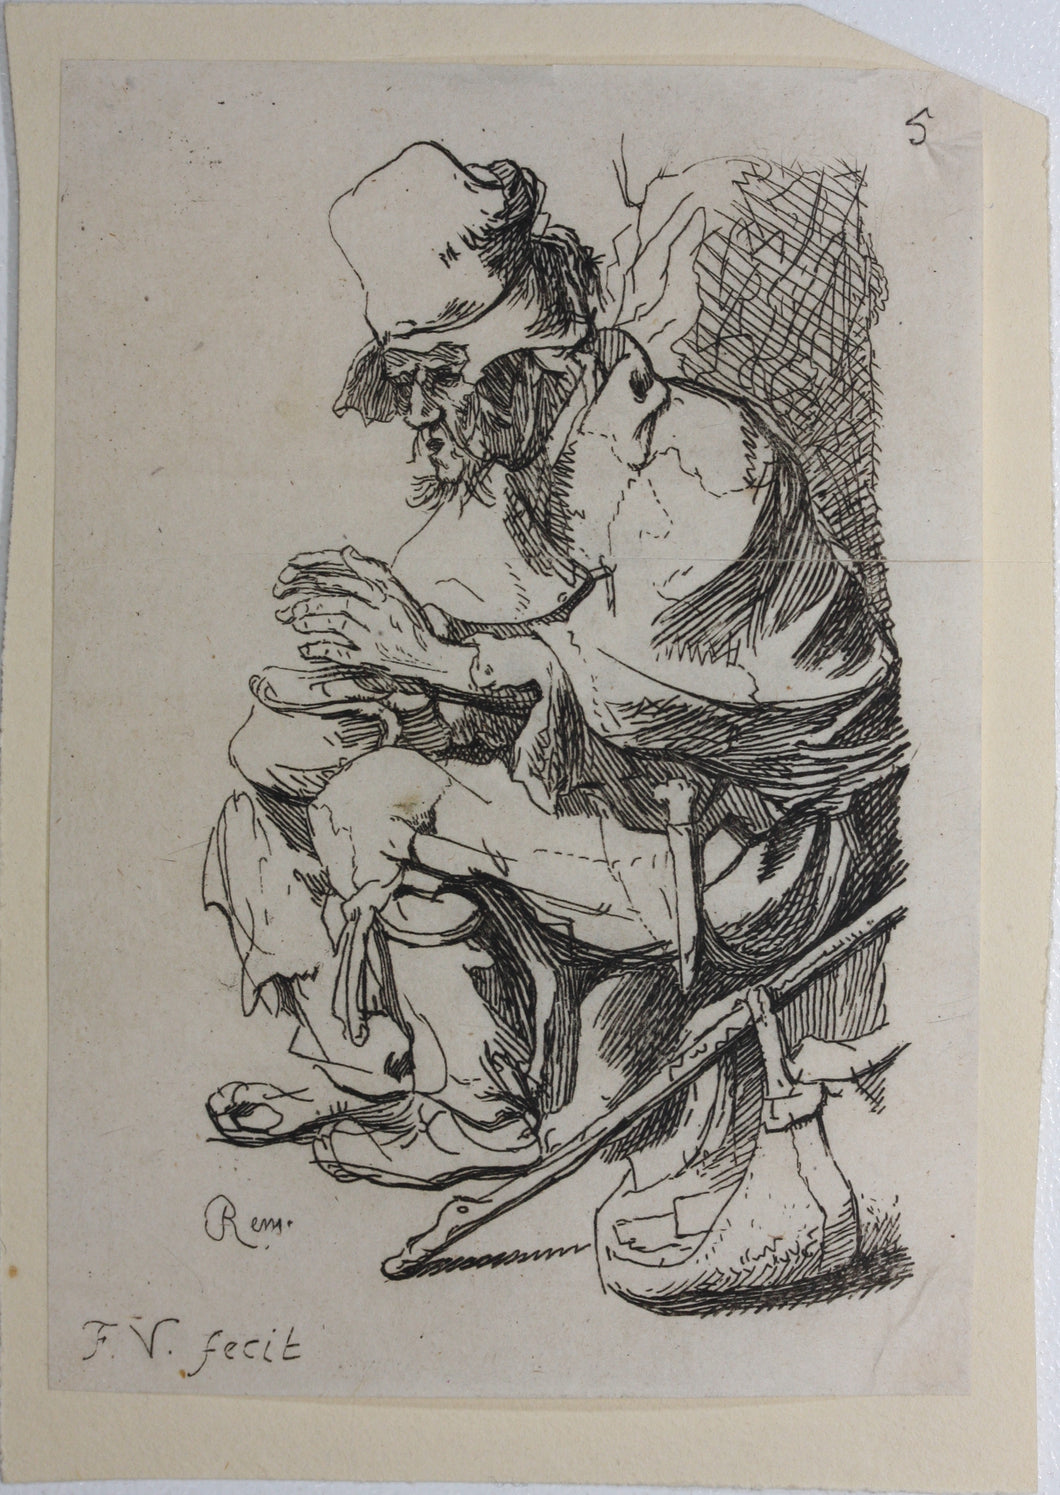 Rembrandt, after. Beggar seated warming his hands at a chafing-dish. Etching by Francis Vivares. 1724-1780.